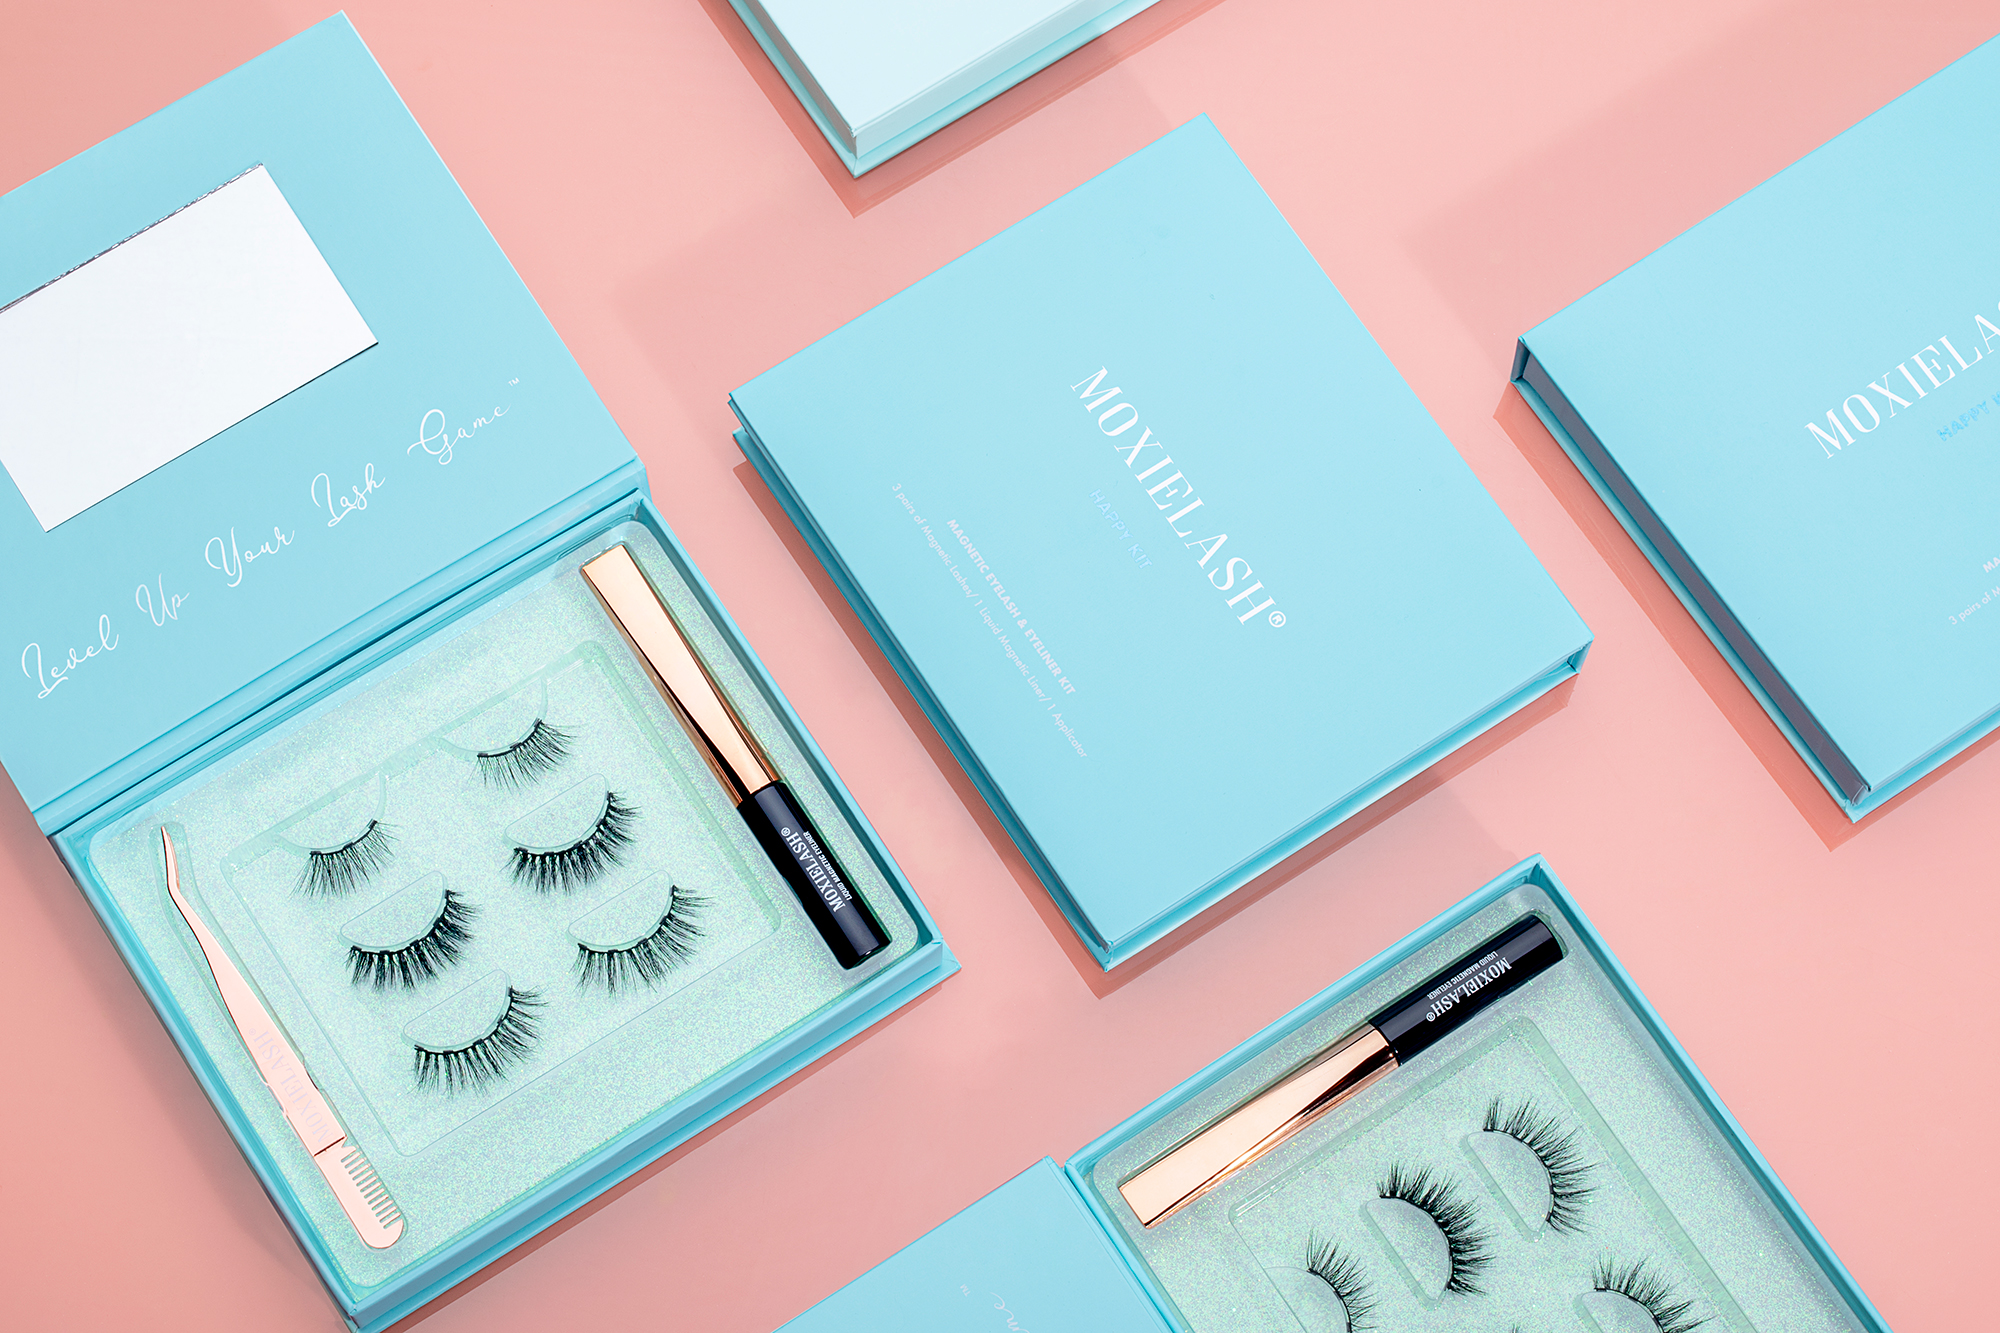 MoxieLash: This Innovative Product Is Changing the Eyelash Game